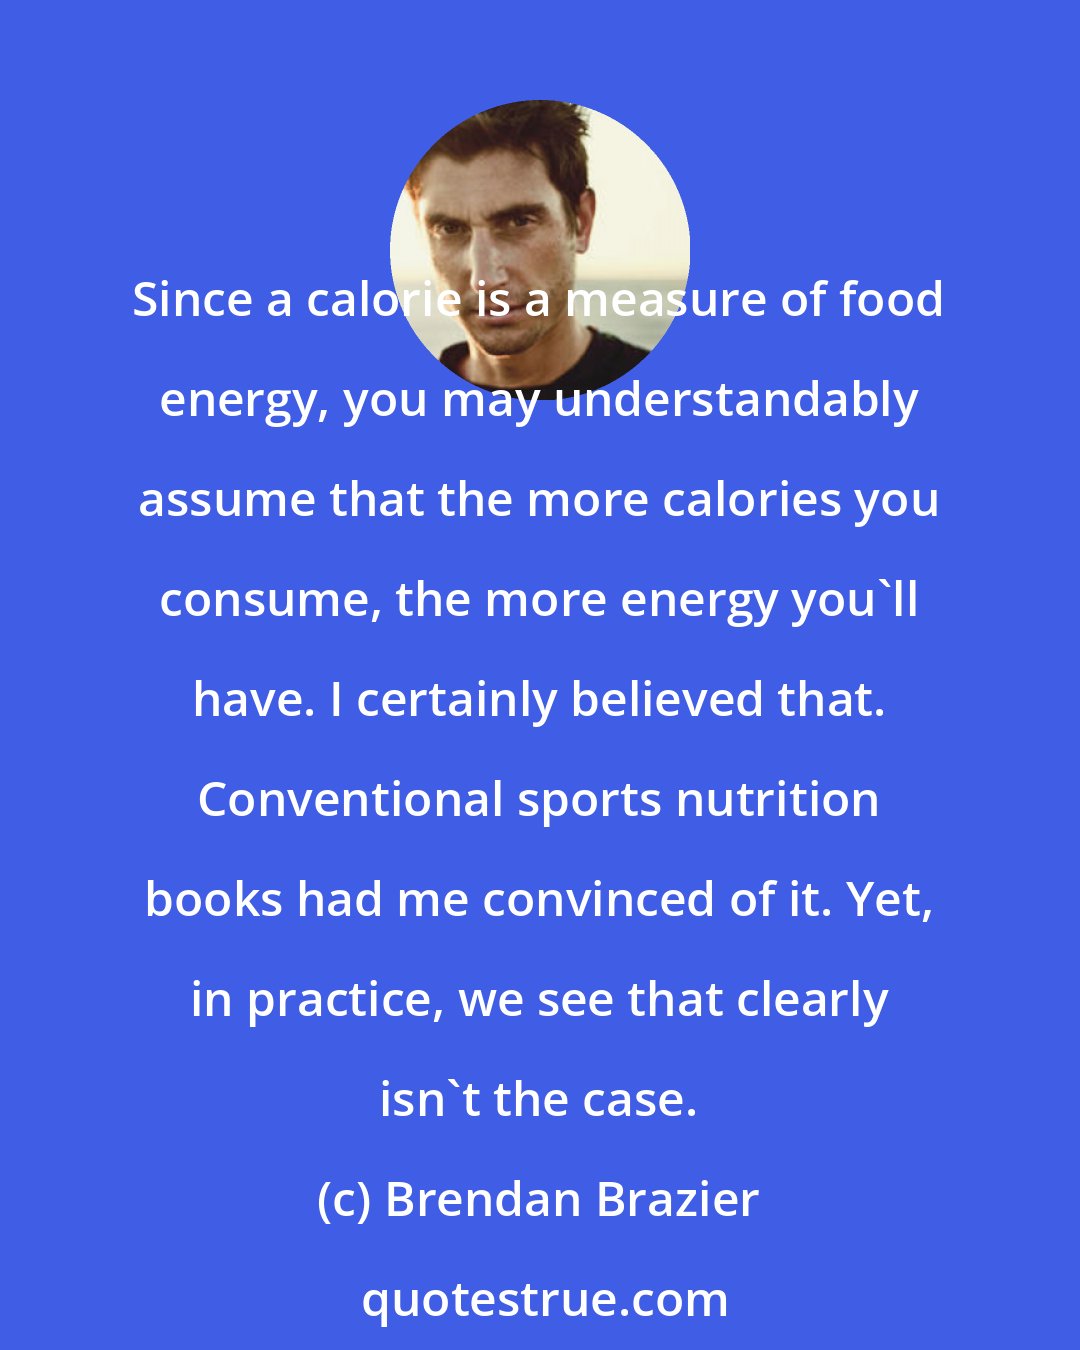 Brendan Brazier: Since a calorie is a measure of food energy, you may understandably assume that the more calories you consume, the more energy you'll have. I certainly believed that. Conventional sports nutrition books had me convinced of it. Yet, in practice, we see that clearly isn't the case.